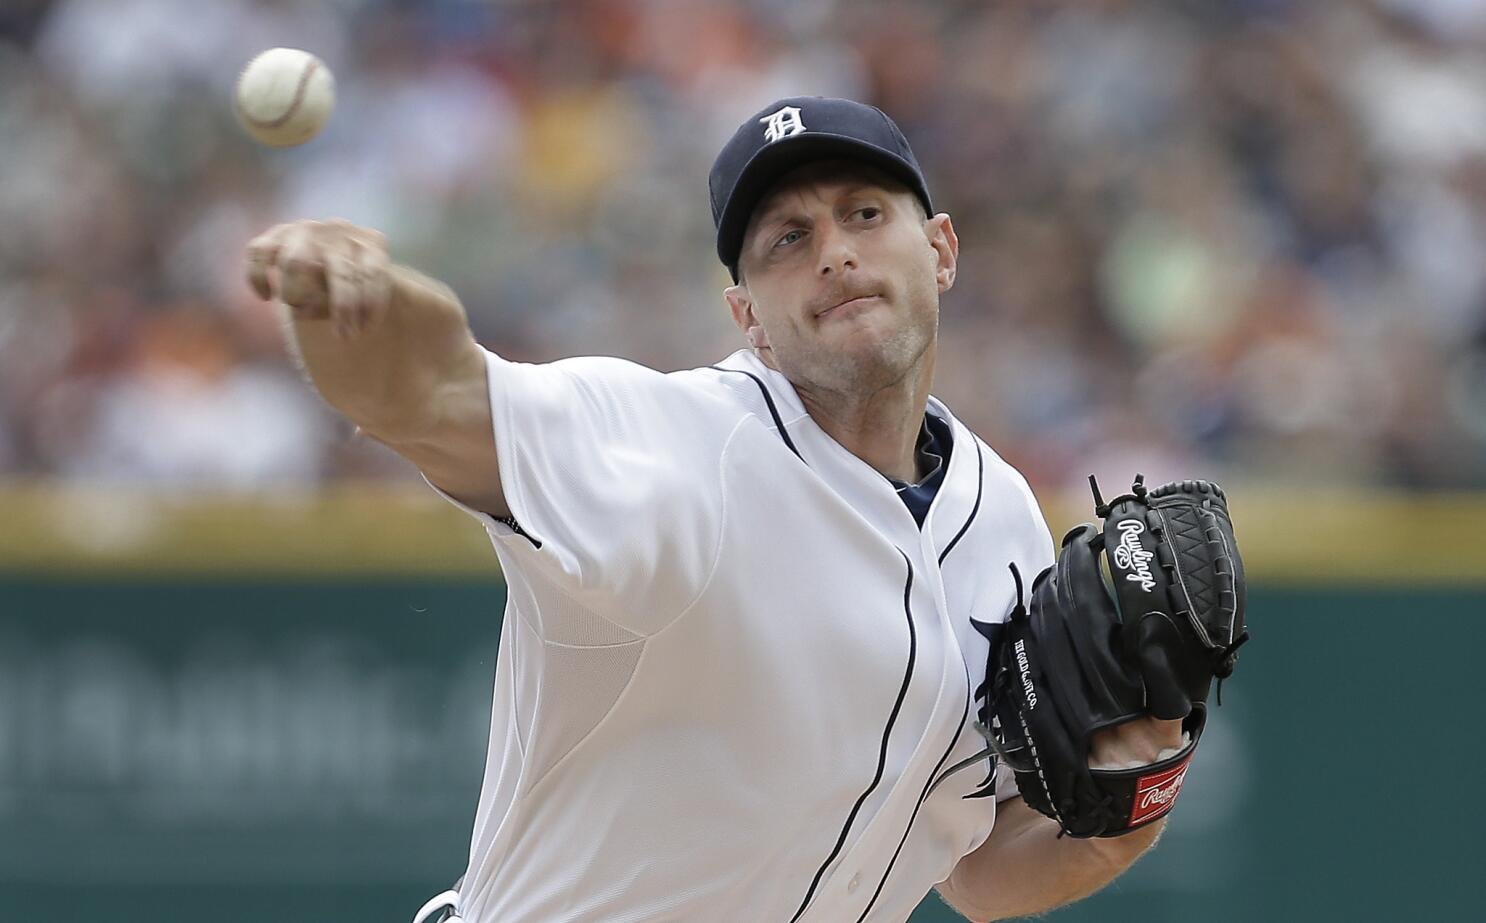 Scherzer Has Good Outing in Loss